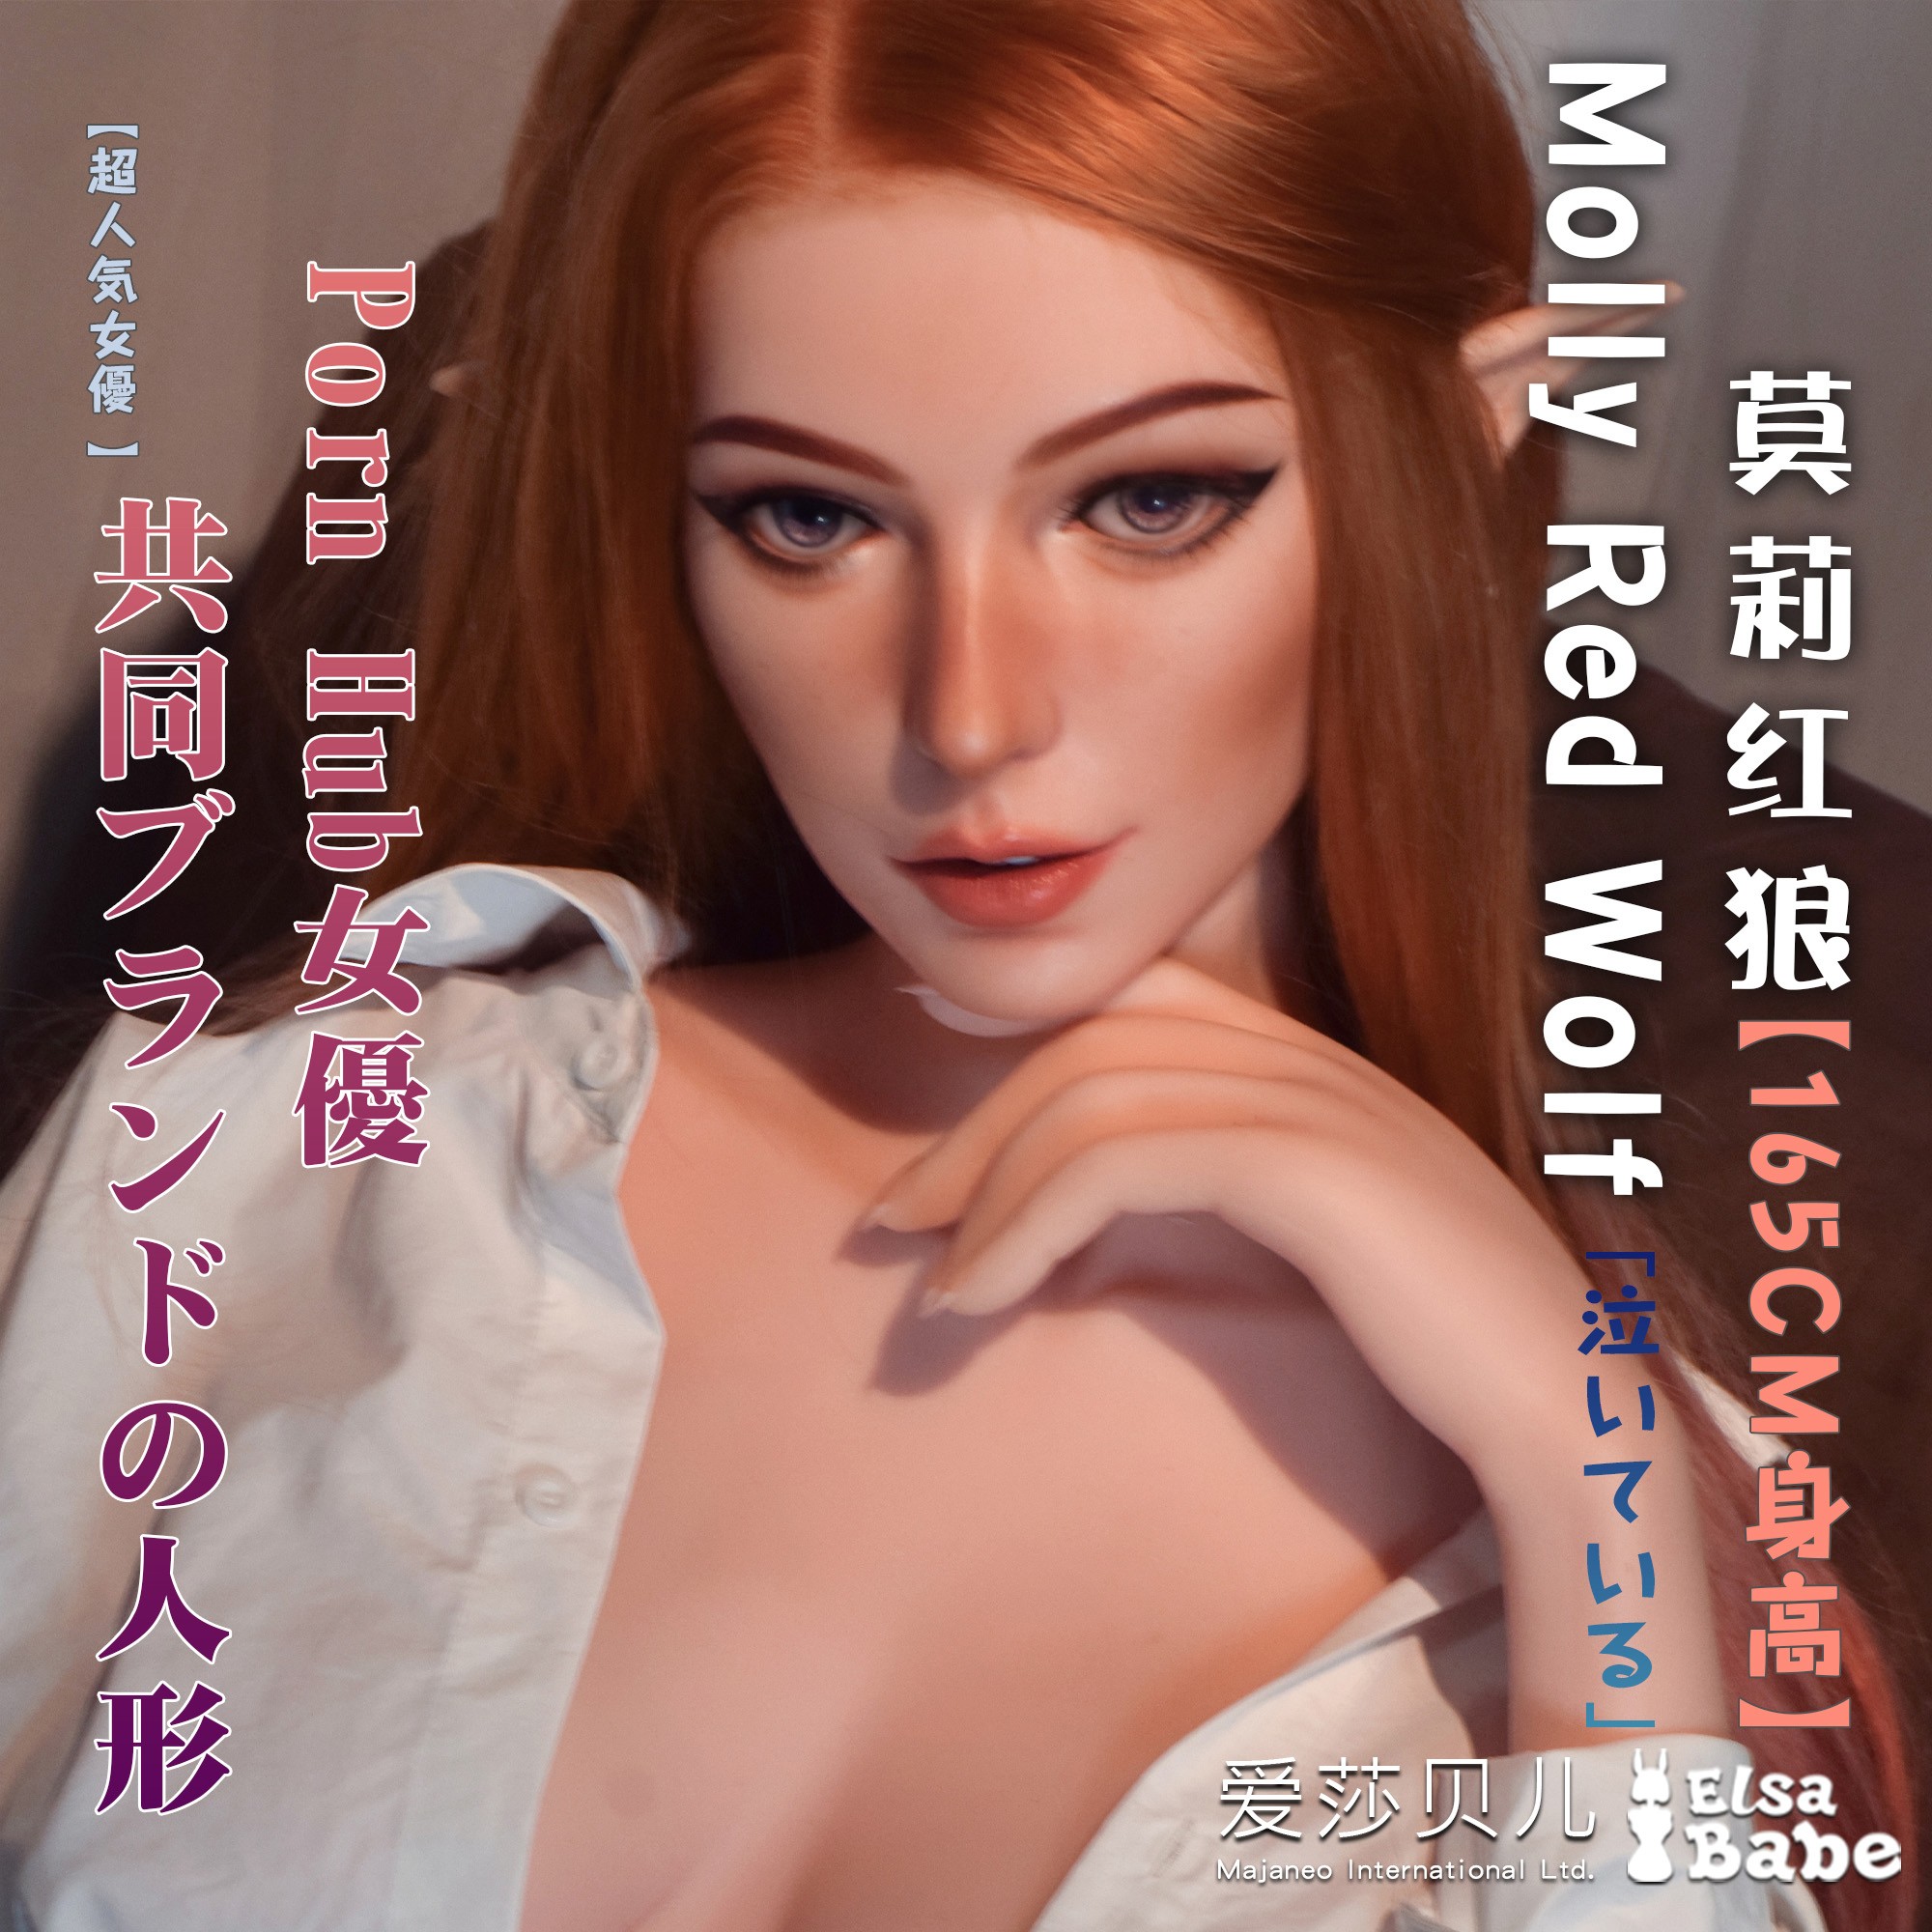 ElsaBabe Head of 160cm/165cm Platinum Silicone Love Doll Authorized by MollyRedWolf